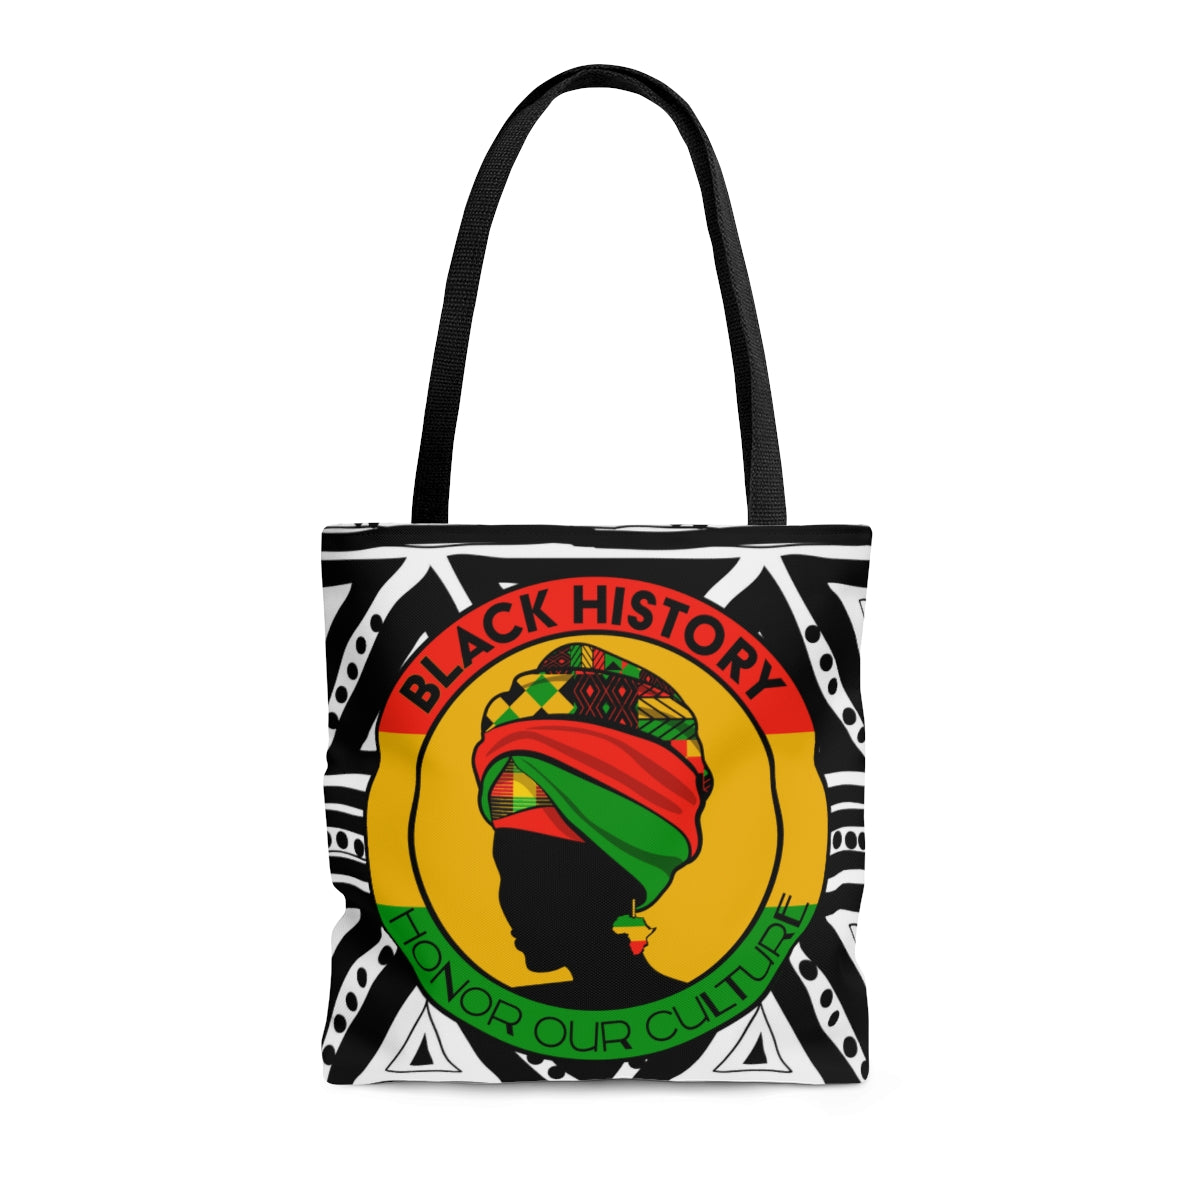 Honor Our Culture Tote Bag